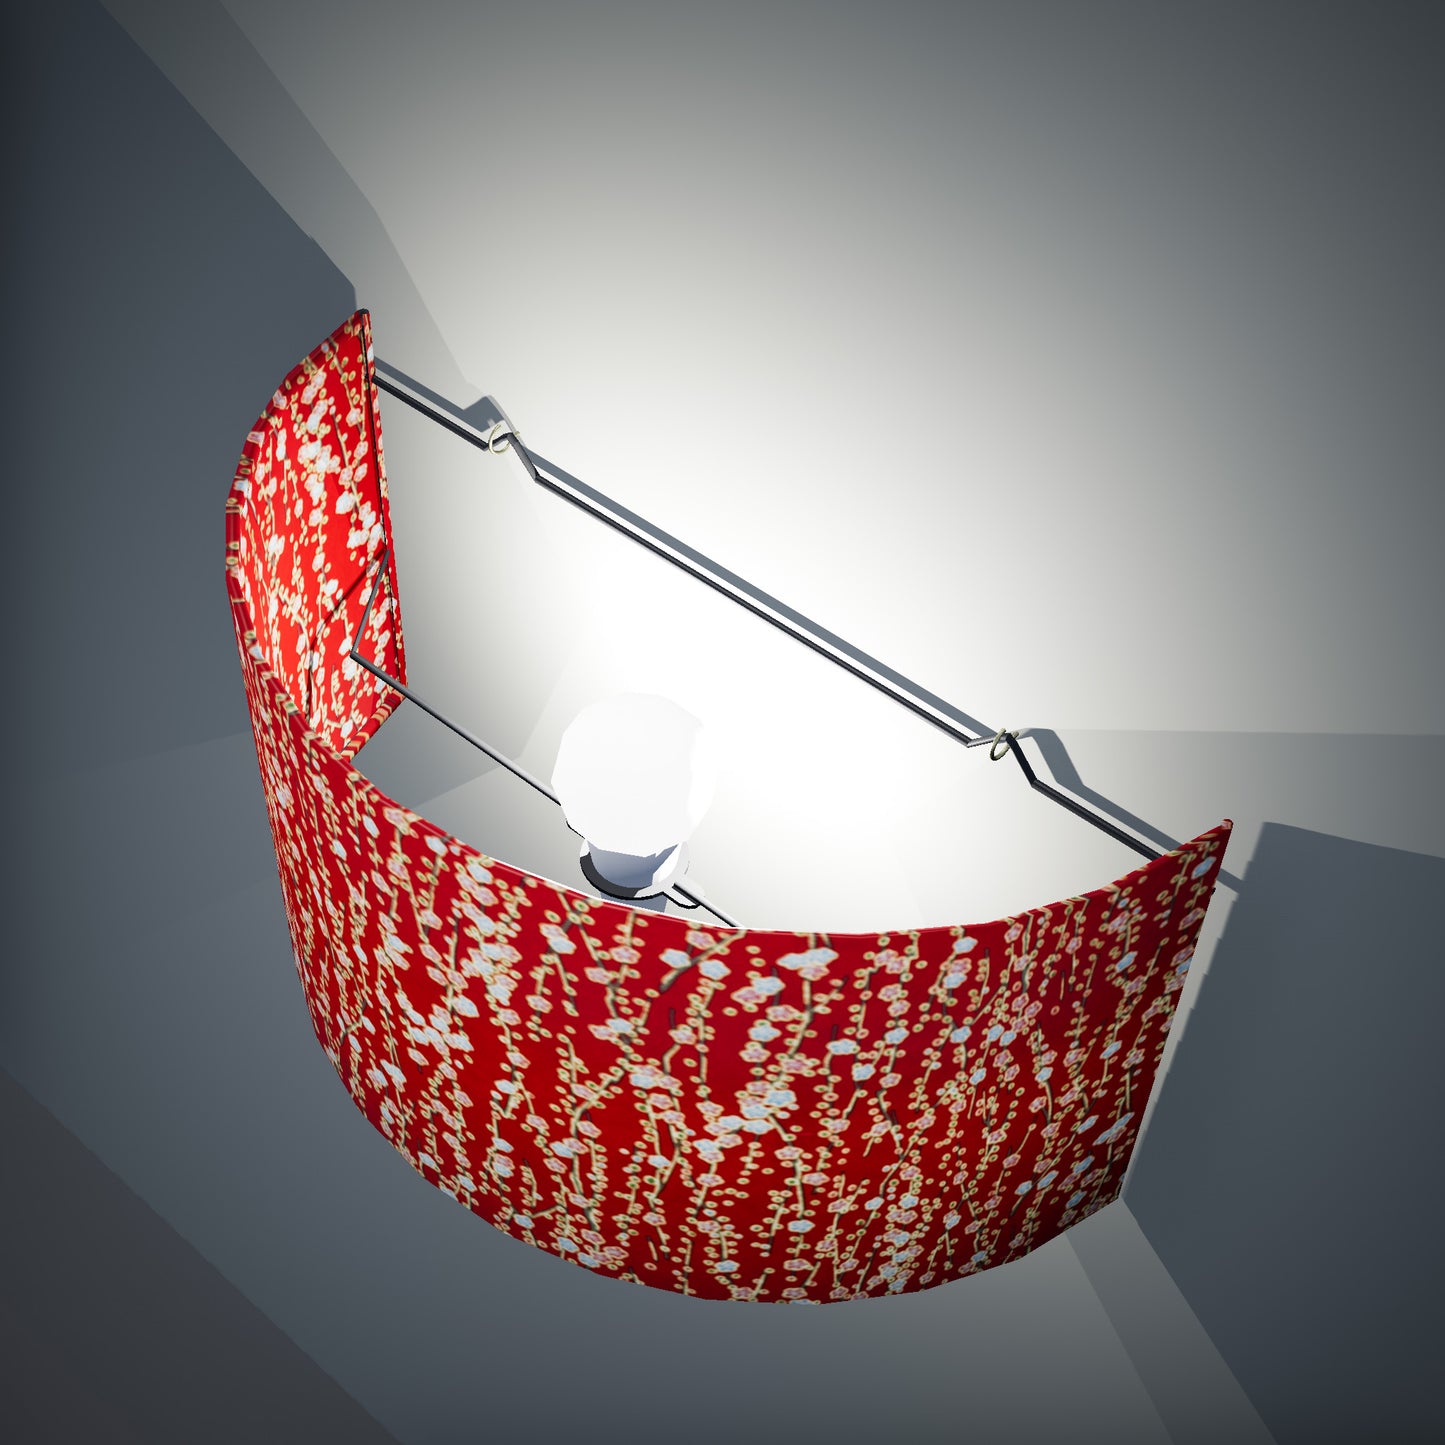 Wall Light - W01 - Red Daisies, 36cm(wide) x 20cm(h) - Imbue Lighting